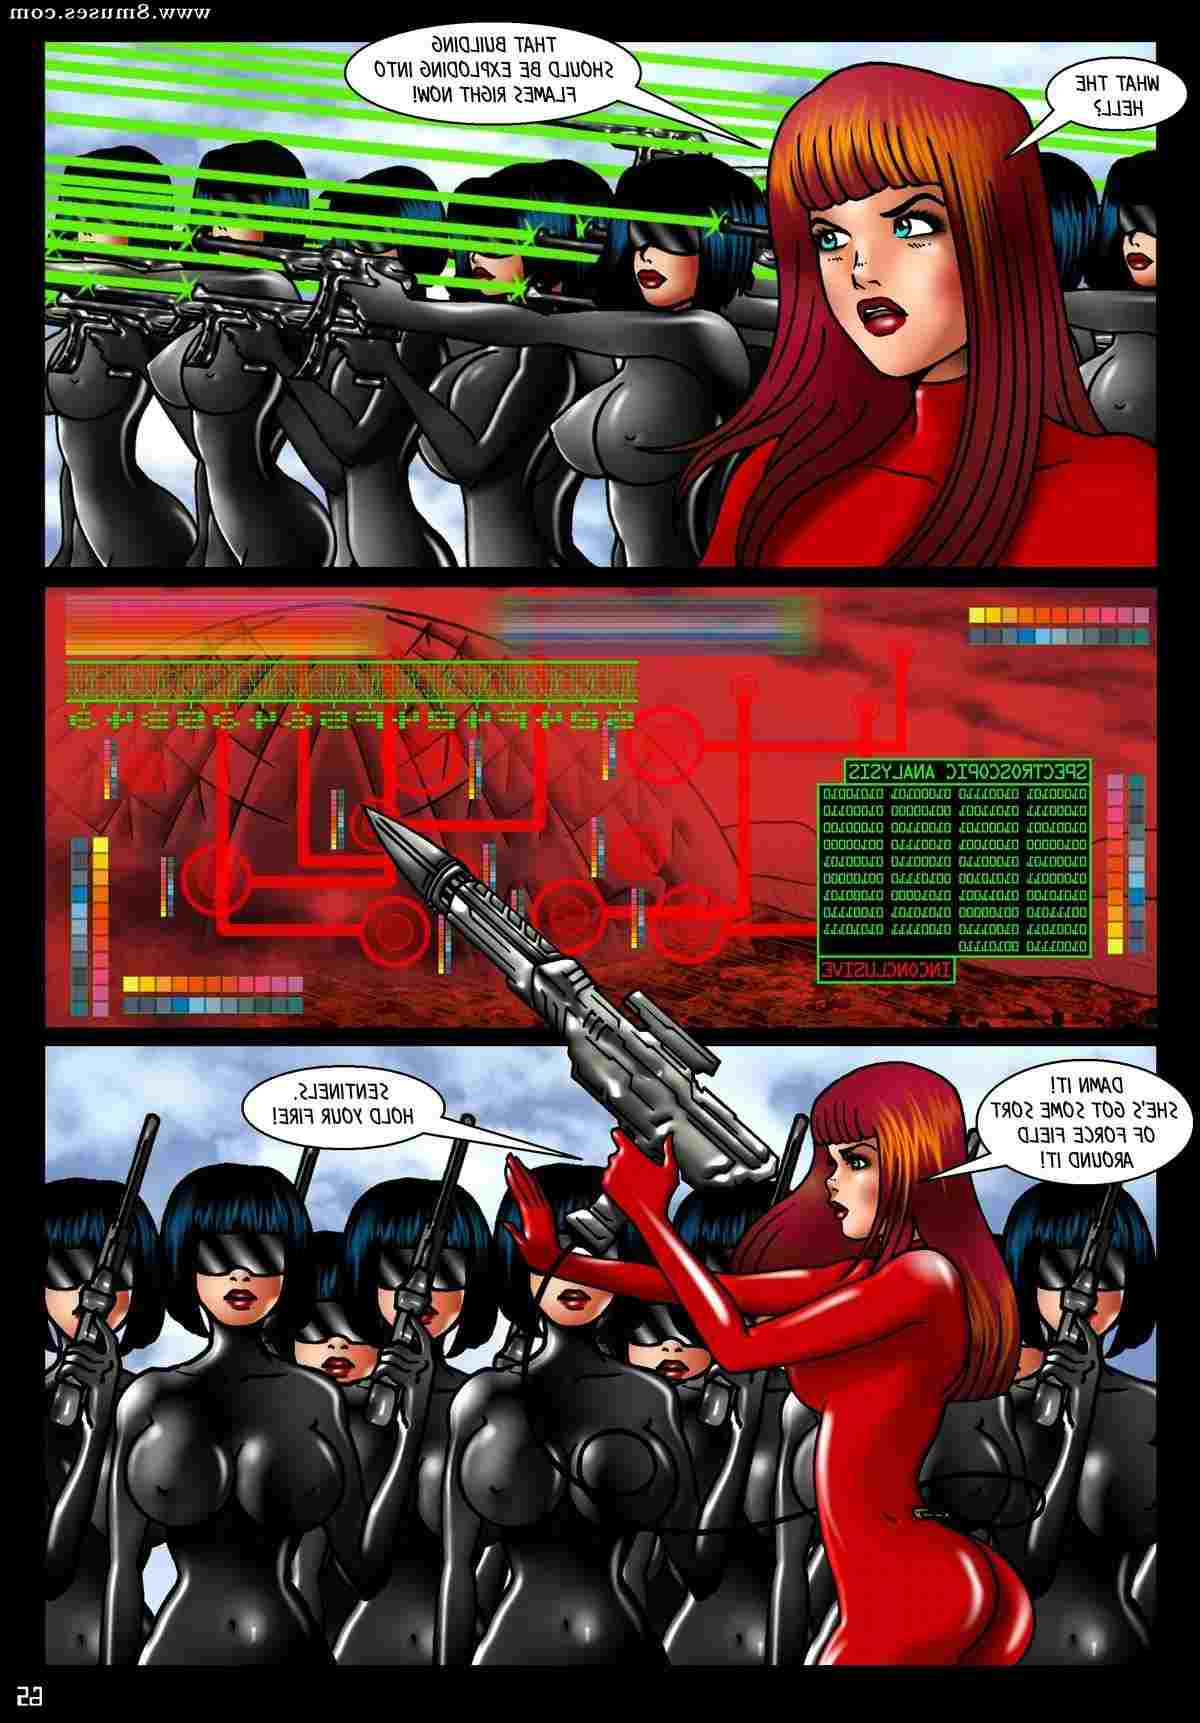 Various-Authors/AB-Lust/Shemale-Android-Sex-Sirens-Renegades Shemale_Android_Sex_Sirens_-_Renegades__8muses_-_Sex_and_Porn_Comics_66.jpg